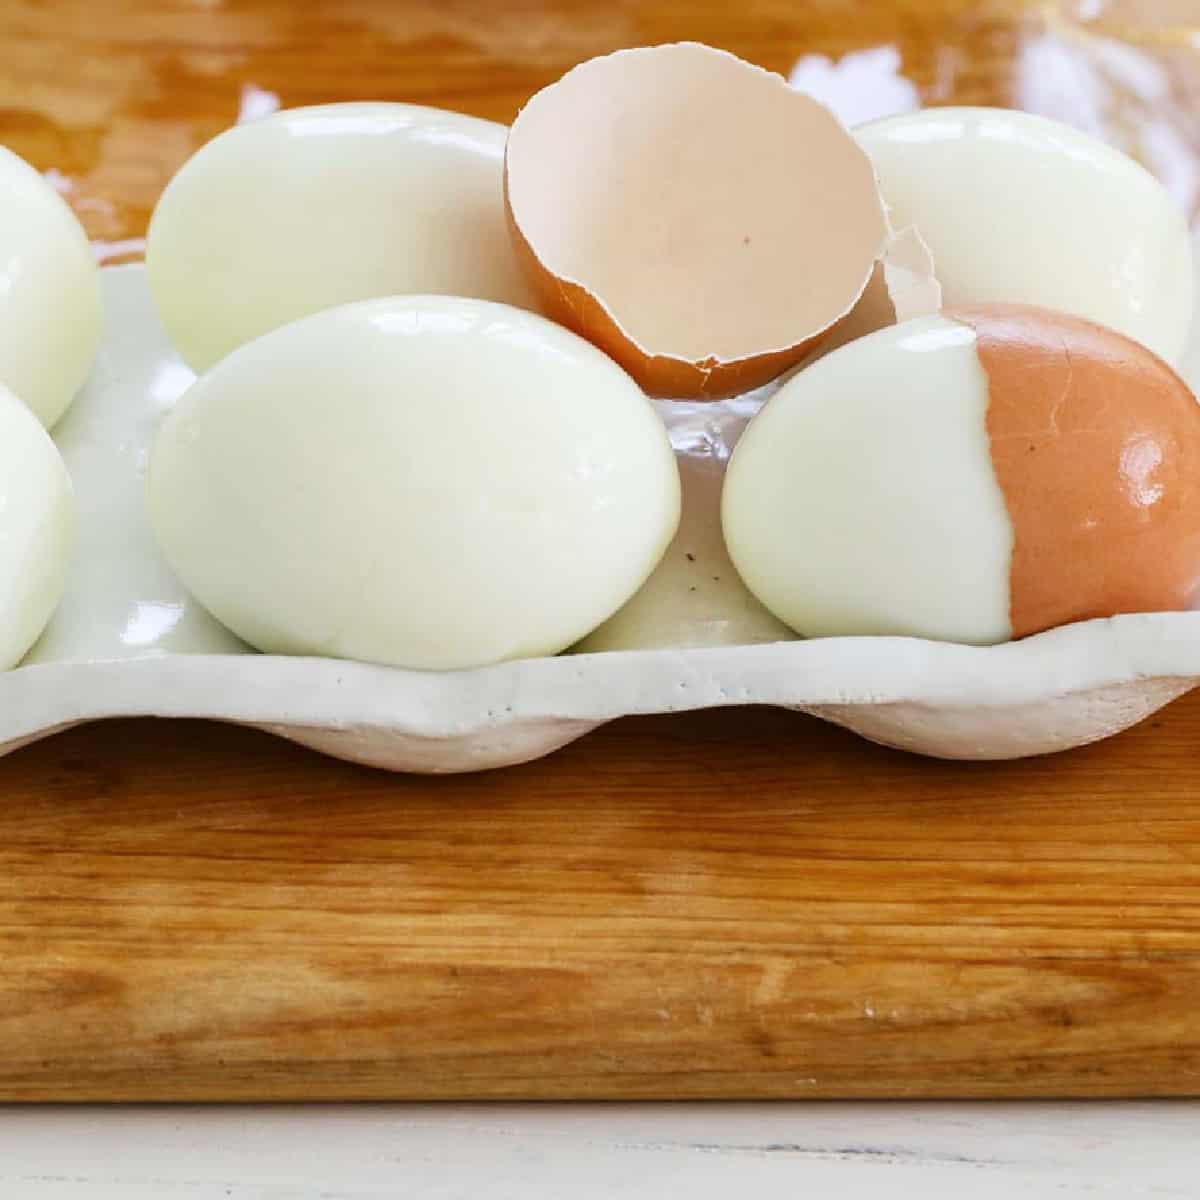 https://www.delicioustable.com/wp-content/uploads/2022/04/Steamed-Hard-Boiled-Eggs-featured-1.jpg